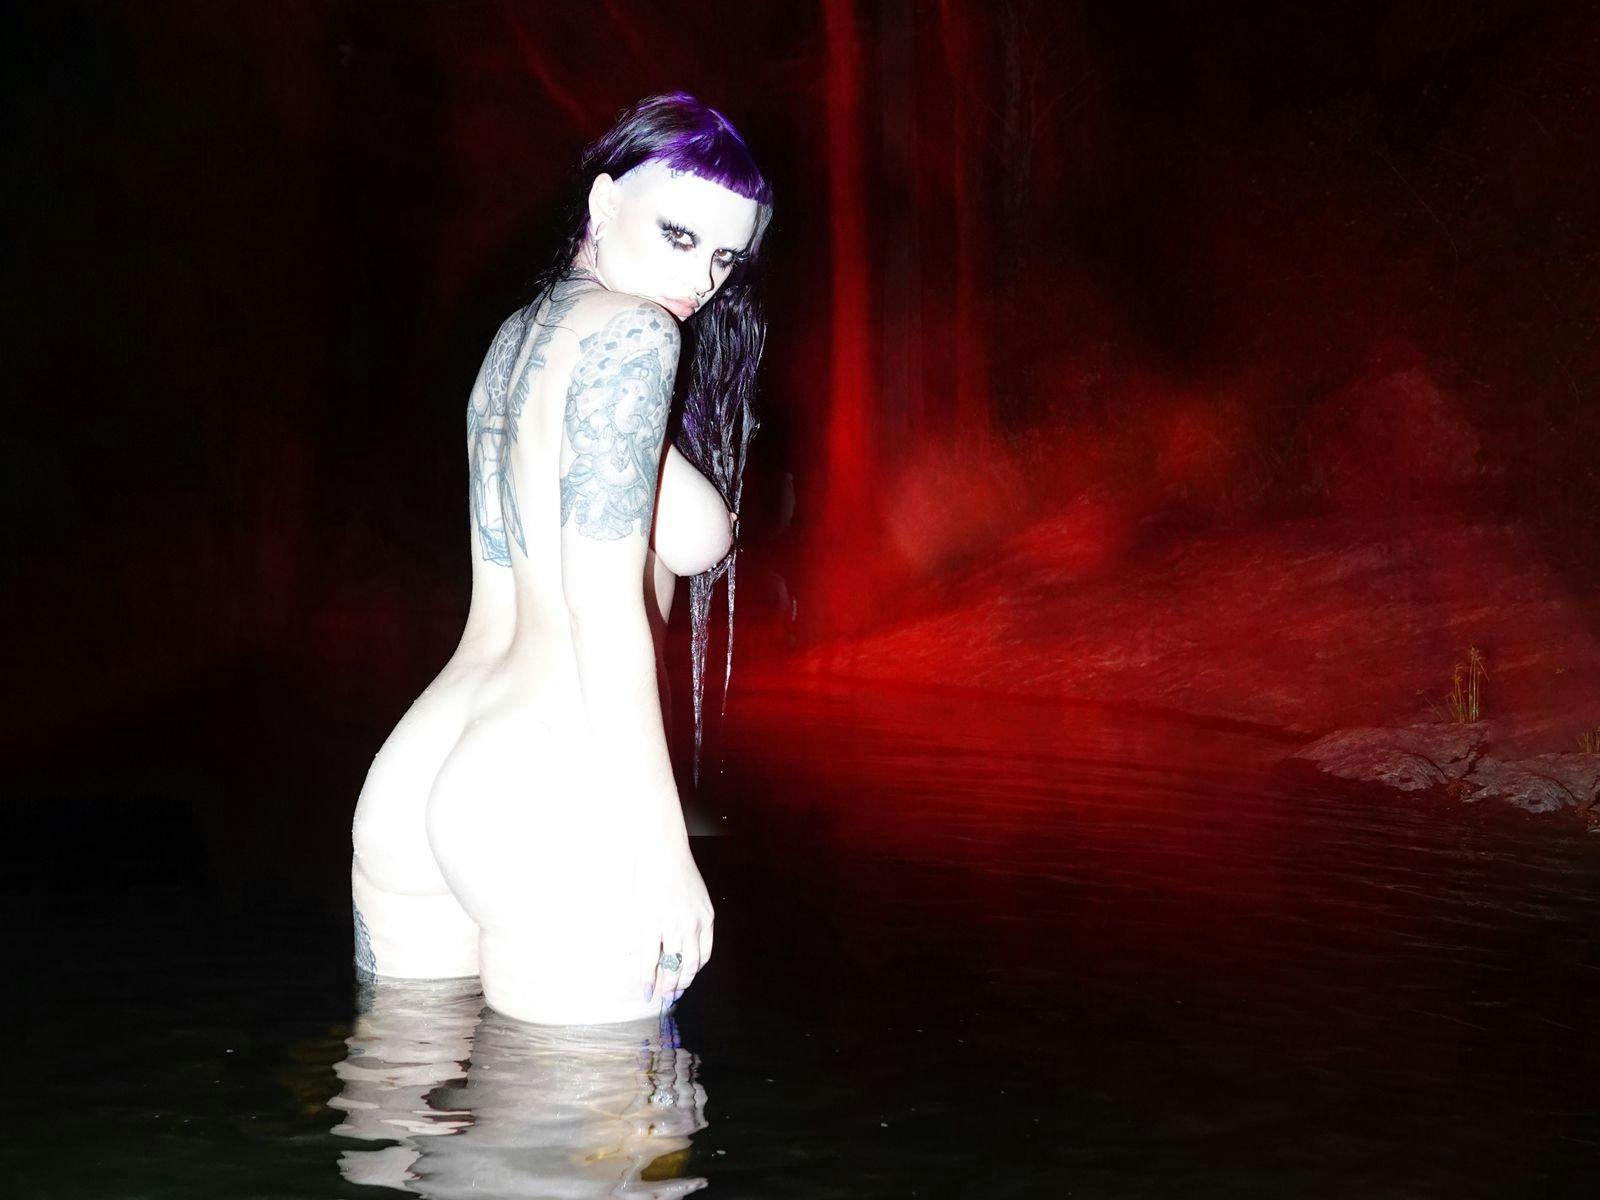 Zheani stands naked, turned side on towards the camera, in a leg high pool of water.